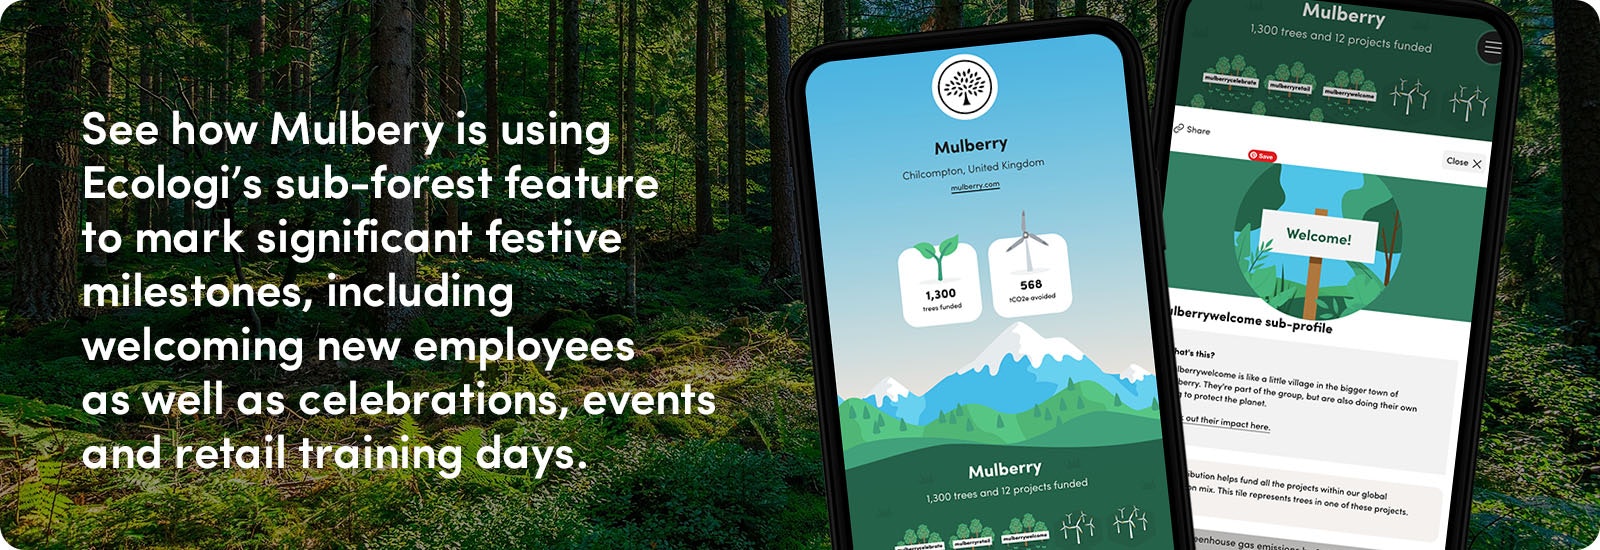 See how Mulbery is using Ecologi’s sub-forest feature to mark significant festive milestones, including welcoming new employees as well as celebrations, events and retail training days.